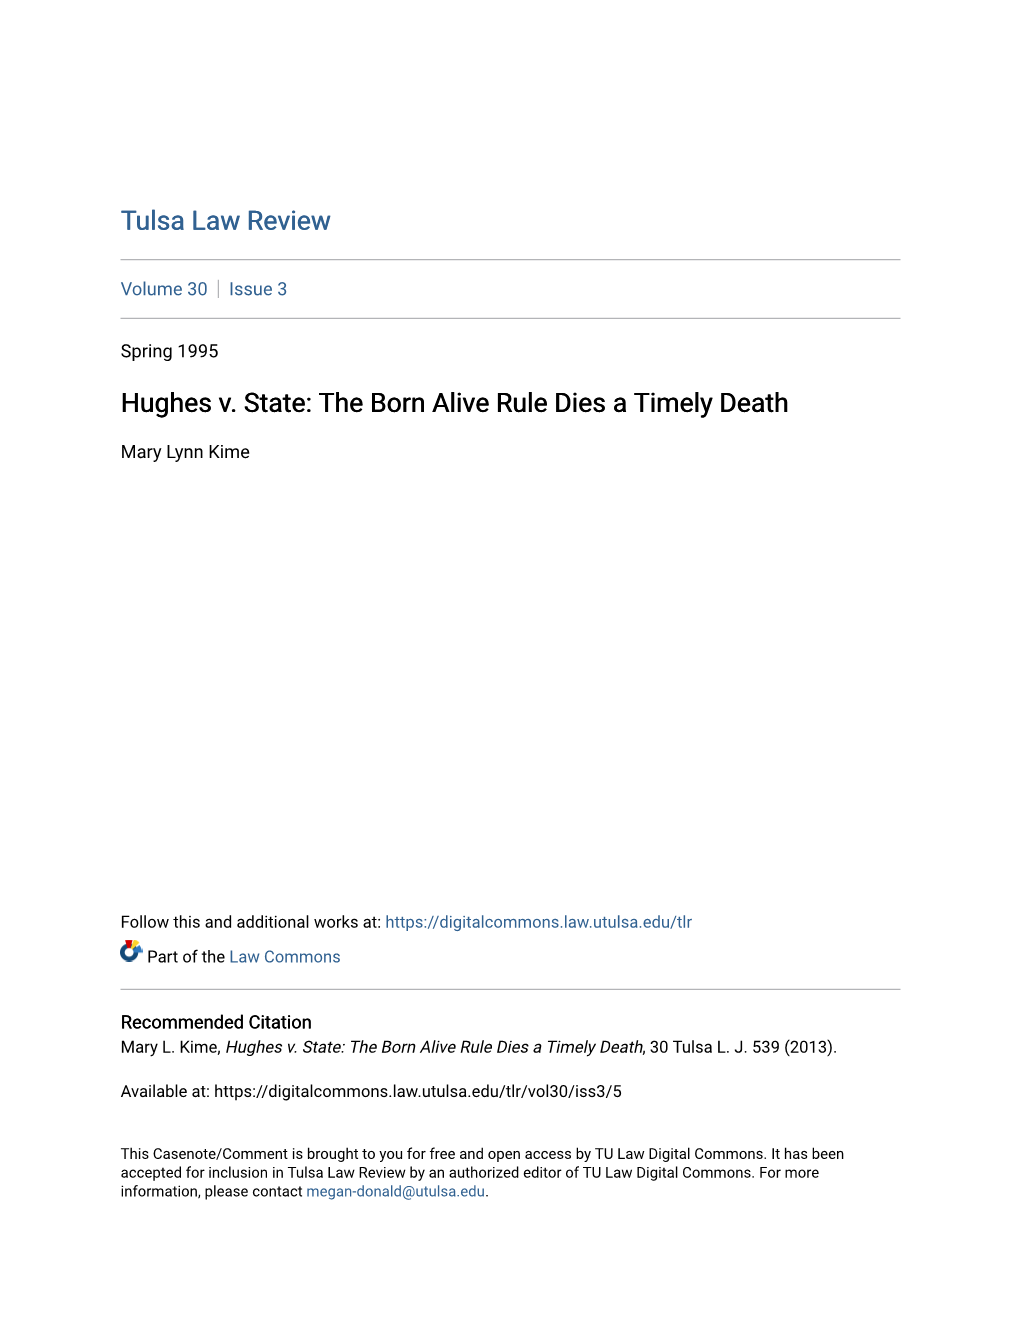 Hughes V. State: the Born Alive Rule Dies a Timely Death